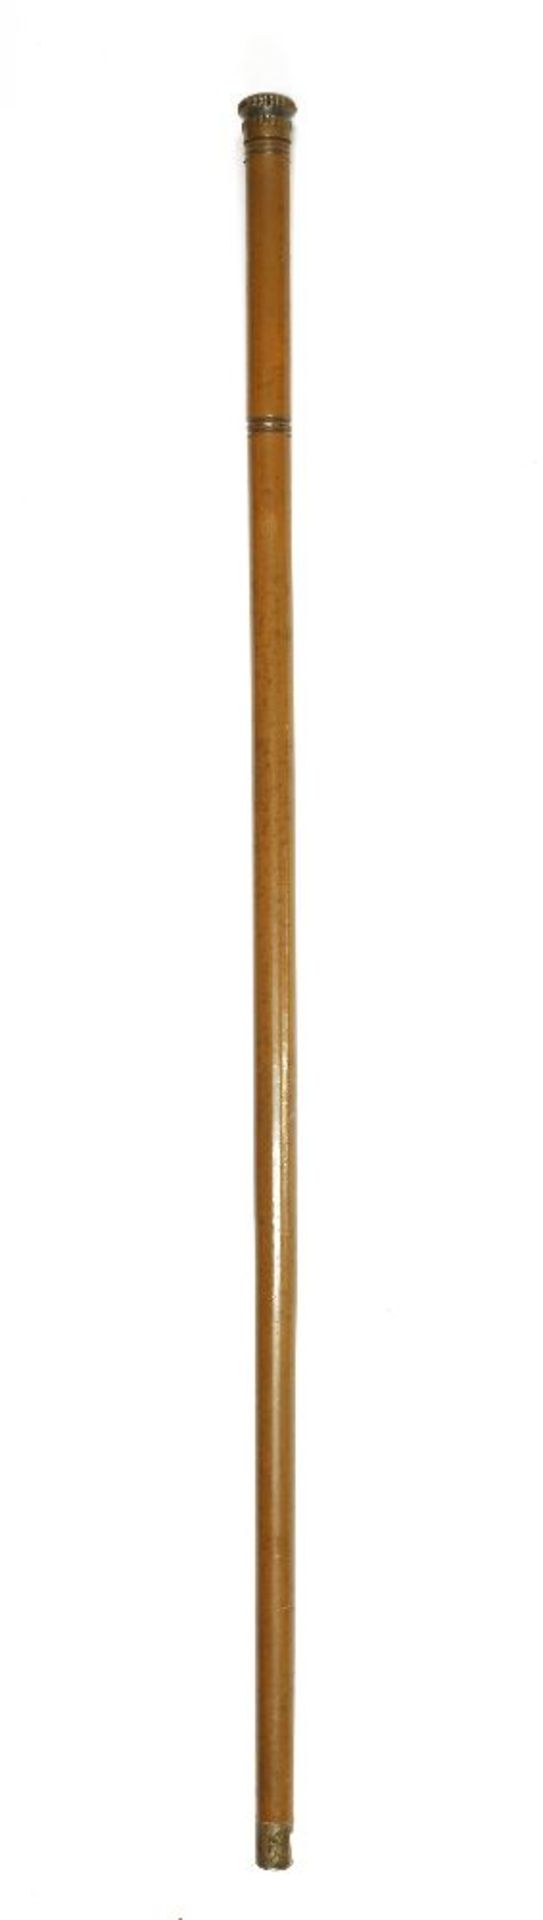 A malacca walking cane,containing a glass vessel, 40cm long, with a stopper in the lower part of the - Bild 2 aus 2